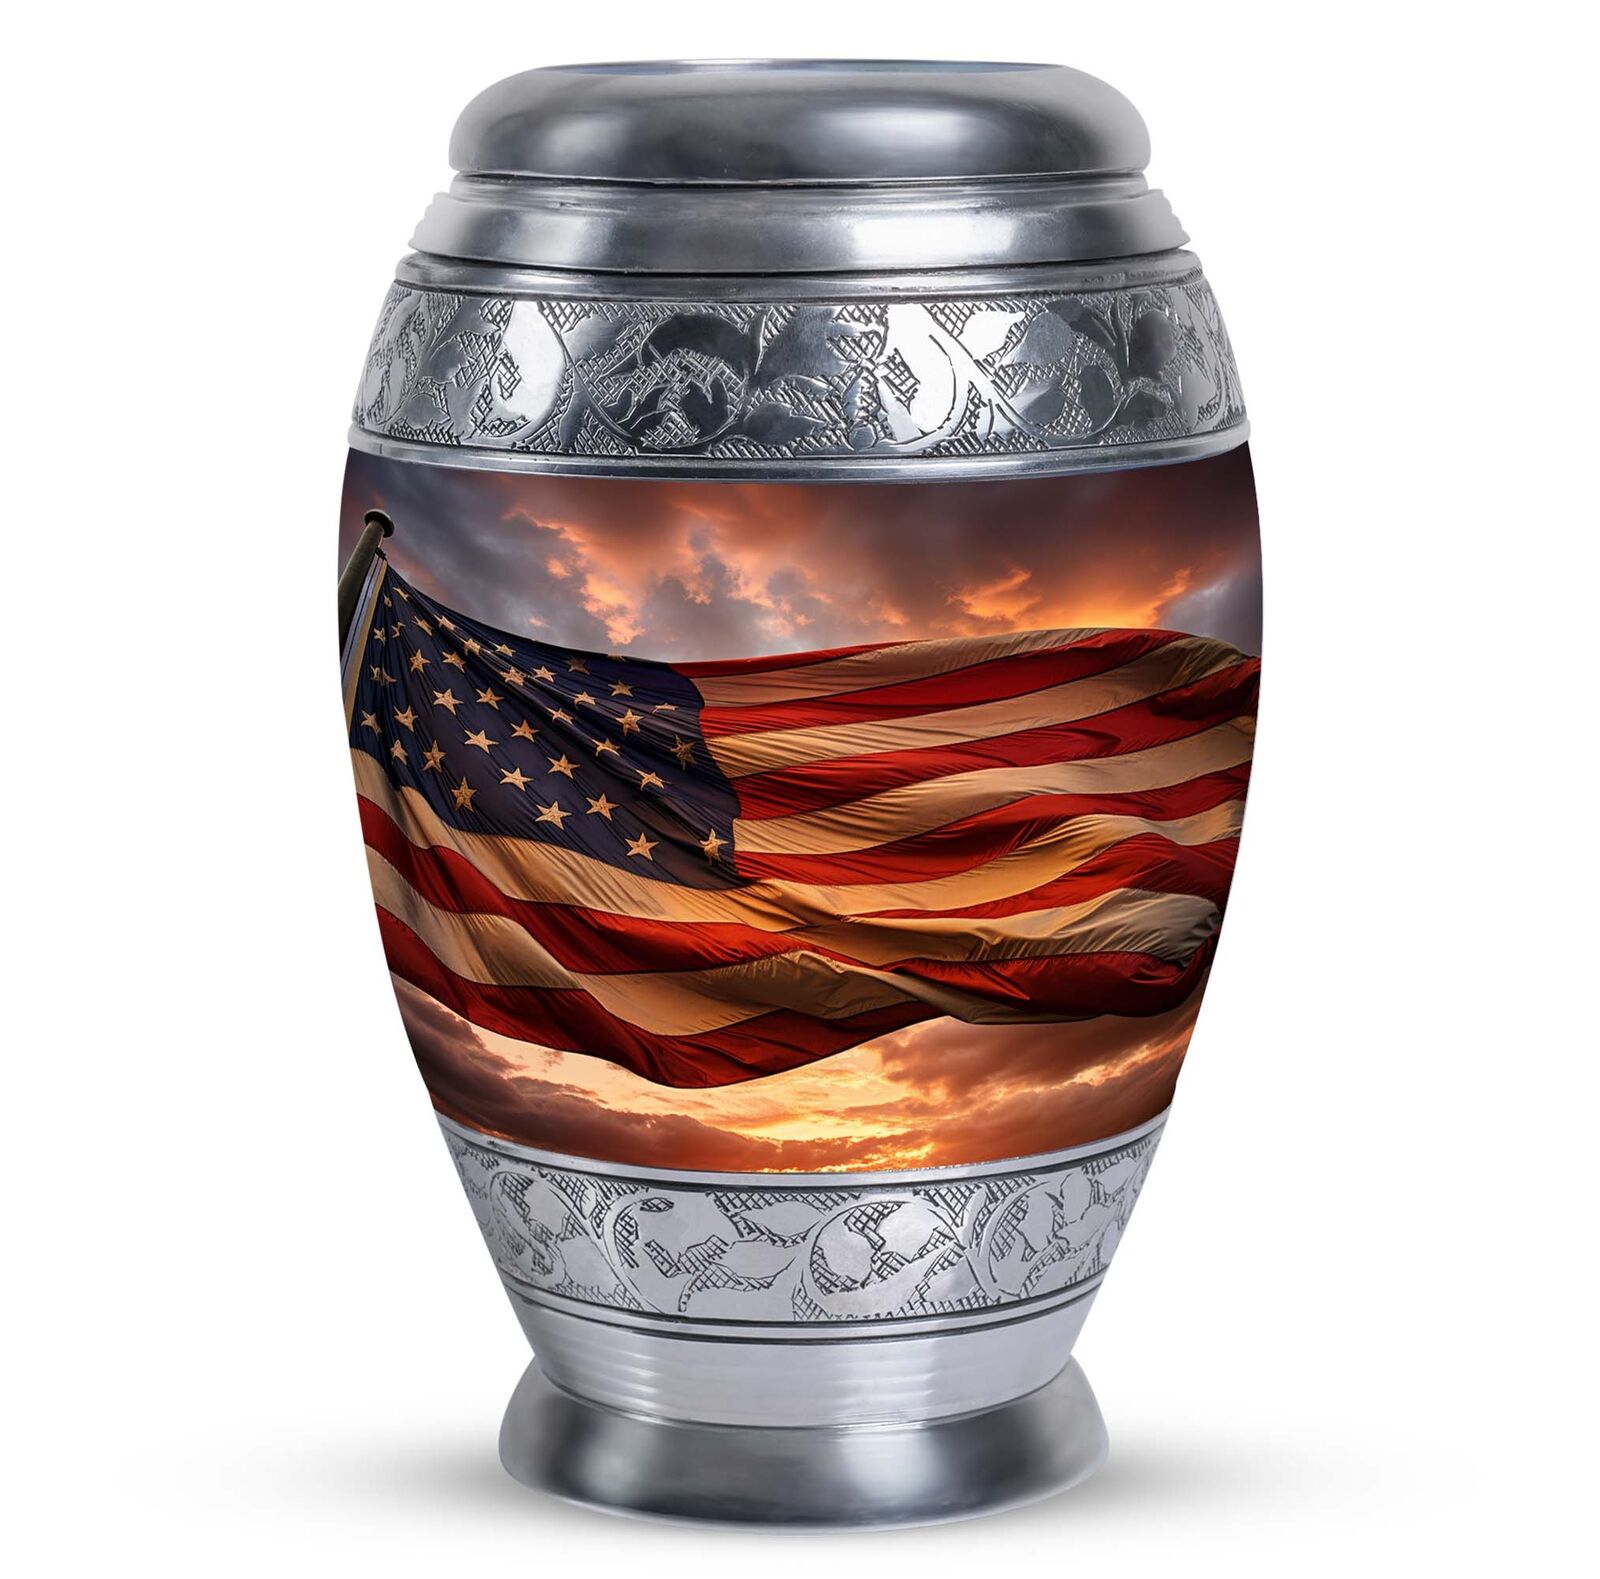 Flag Of The United States Flying High Against The Cloudy Sky (10 Inch) Large Urn